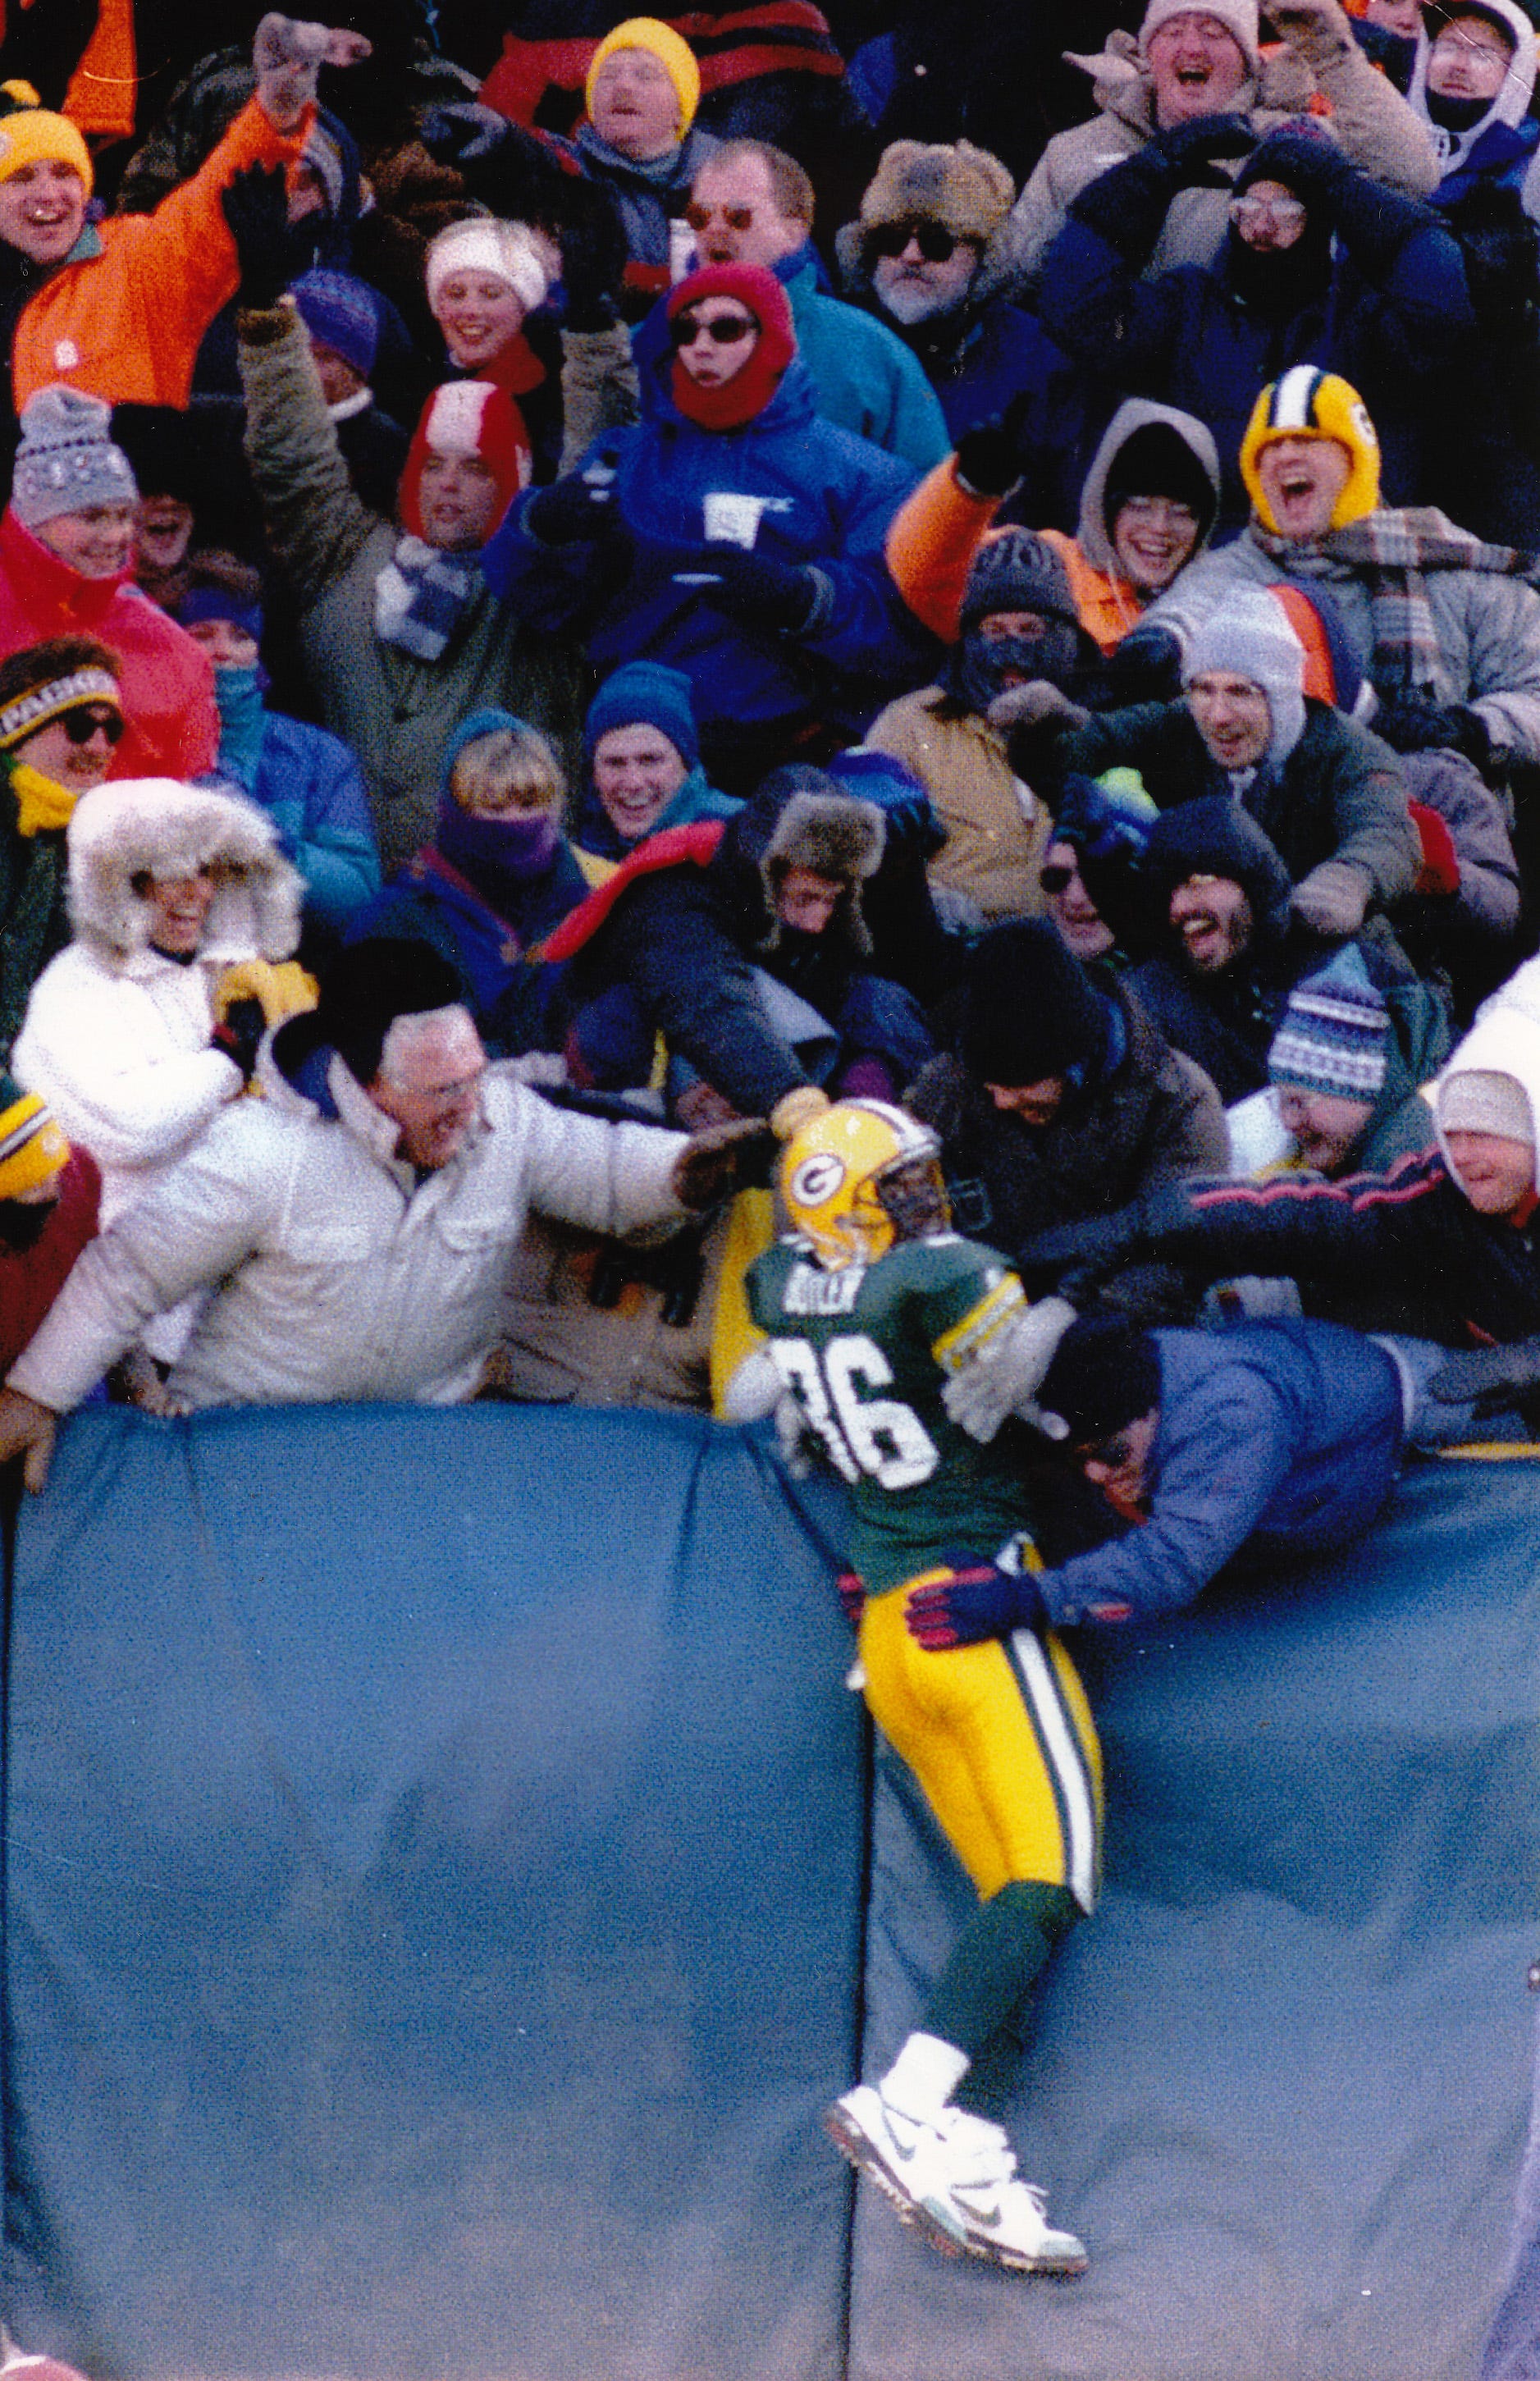 LeRoy Butler incorporated the 'Lambeau Leap' into his Saturday wedding in Green Bay